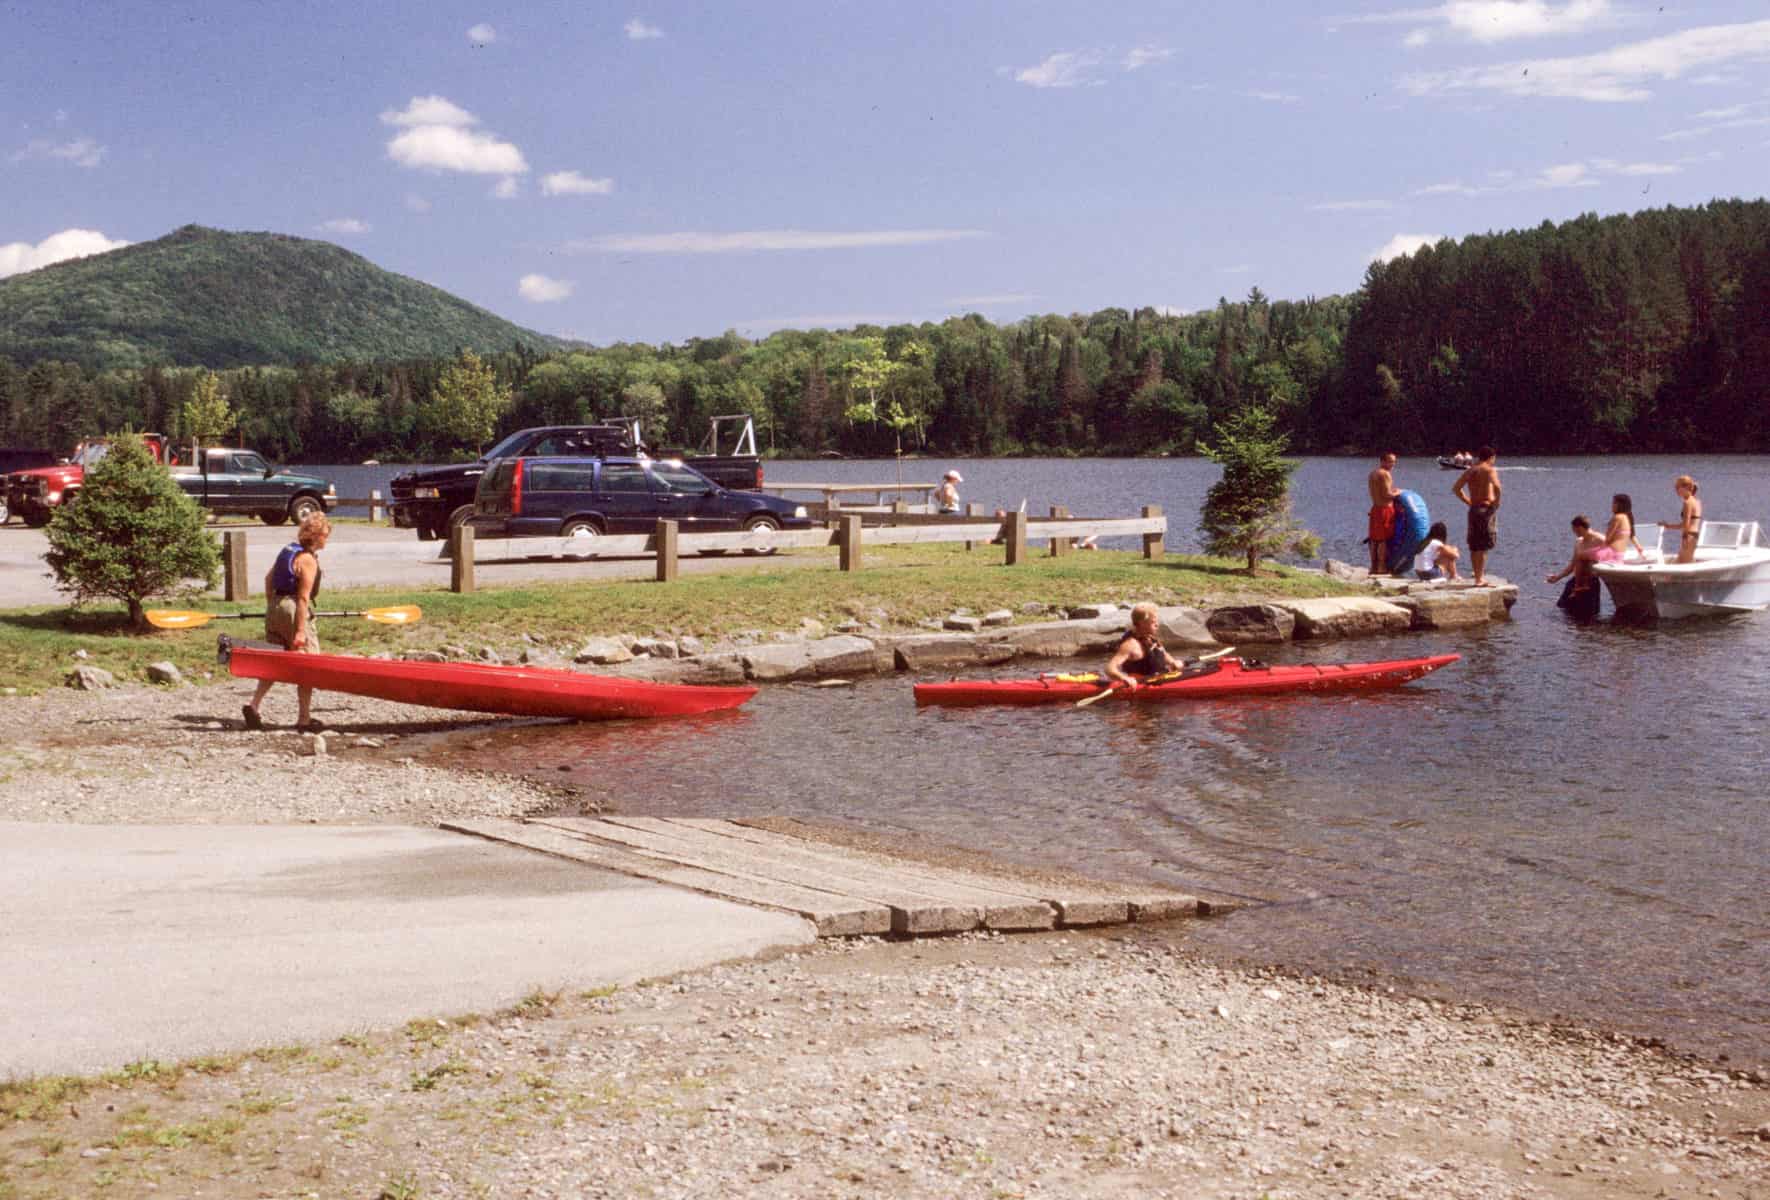 Vermont Fish & Wildlife Department reminds us that swimming at its fishing access areas is prohibited.